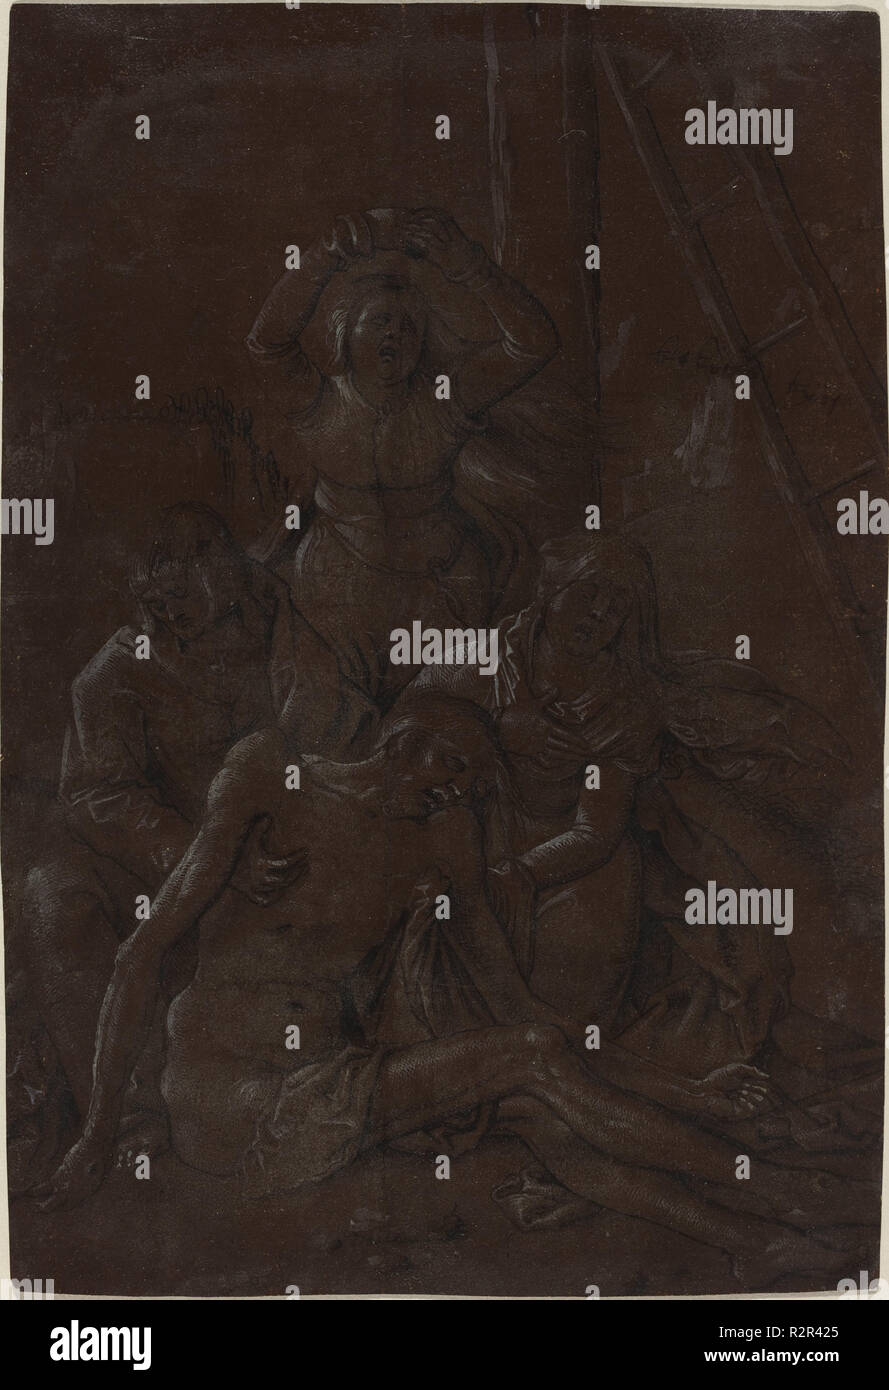 The Lamentation. Dated: c. 1515. Dimensions: overall: 27.2 x 18.3 cm (10 11/16 x 7 3/16 in.). Medium: brush and black ink, heightened with white, on dark brown prepared paper; the surface varnished. Museum: National Gallery of Art, Washington DC. Author: Hans Baldung Grien. Stock Photo